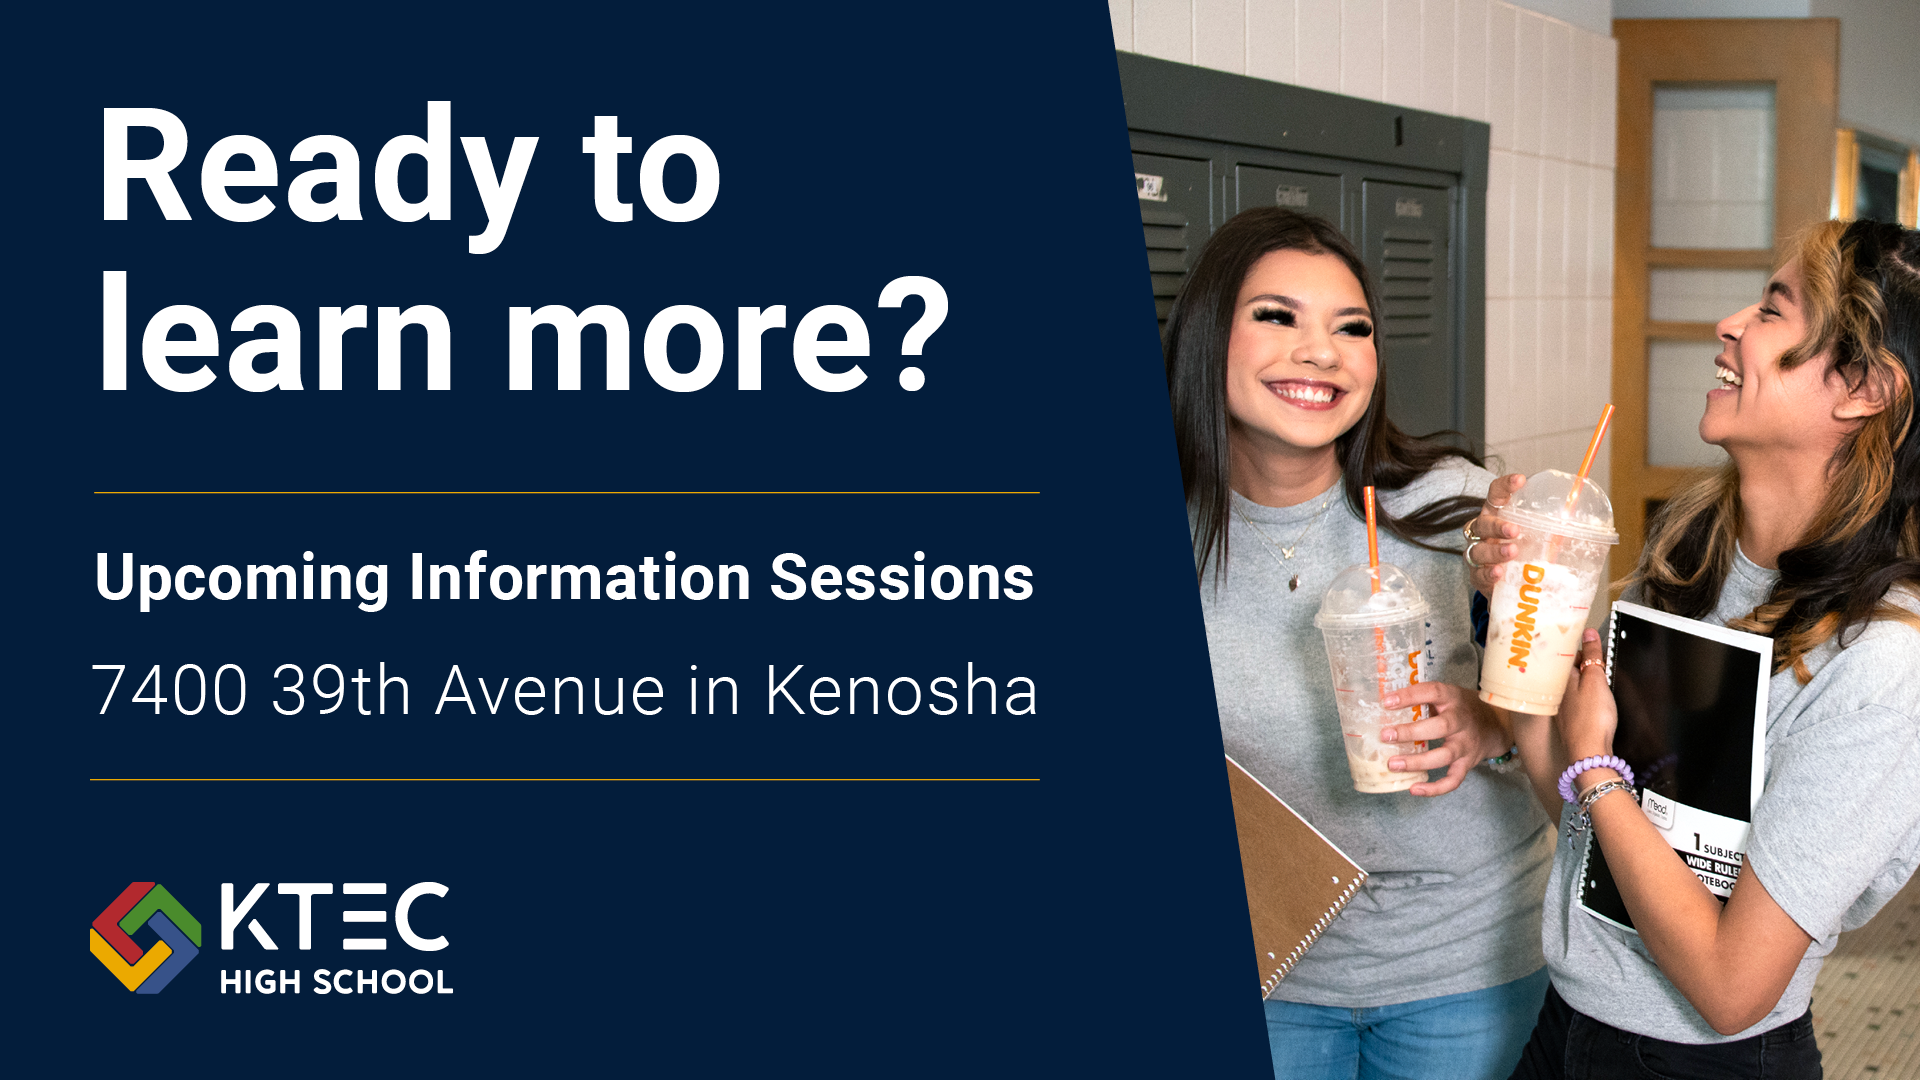 Ready to learn more? Upcoming Information Sessions